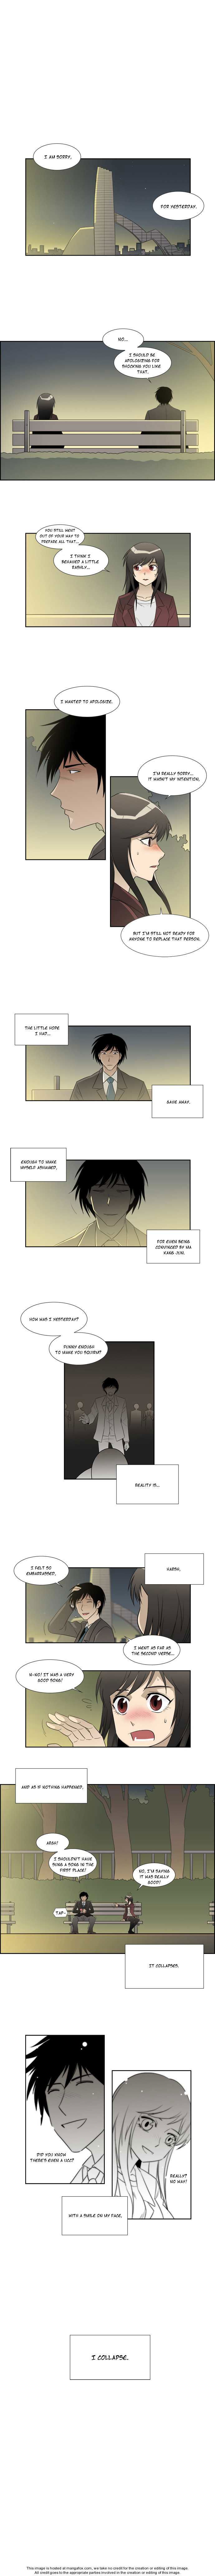 Melo Holic Chapter 012 page 2